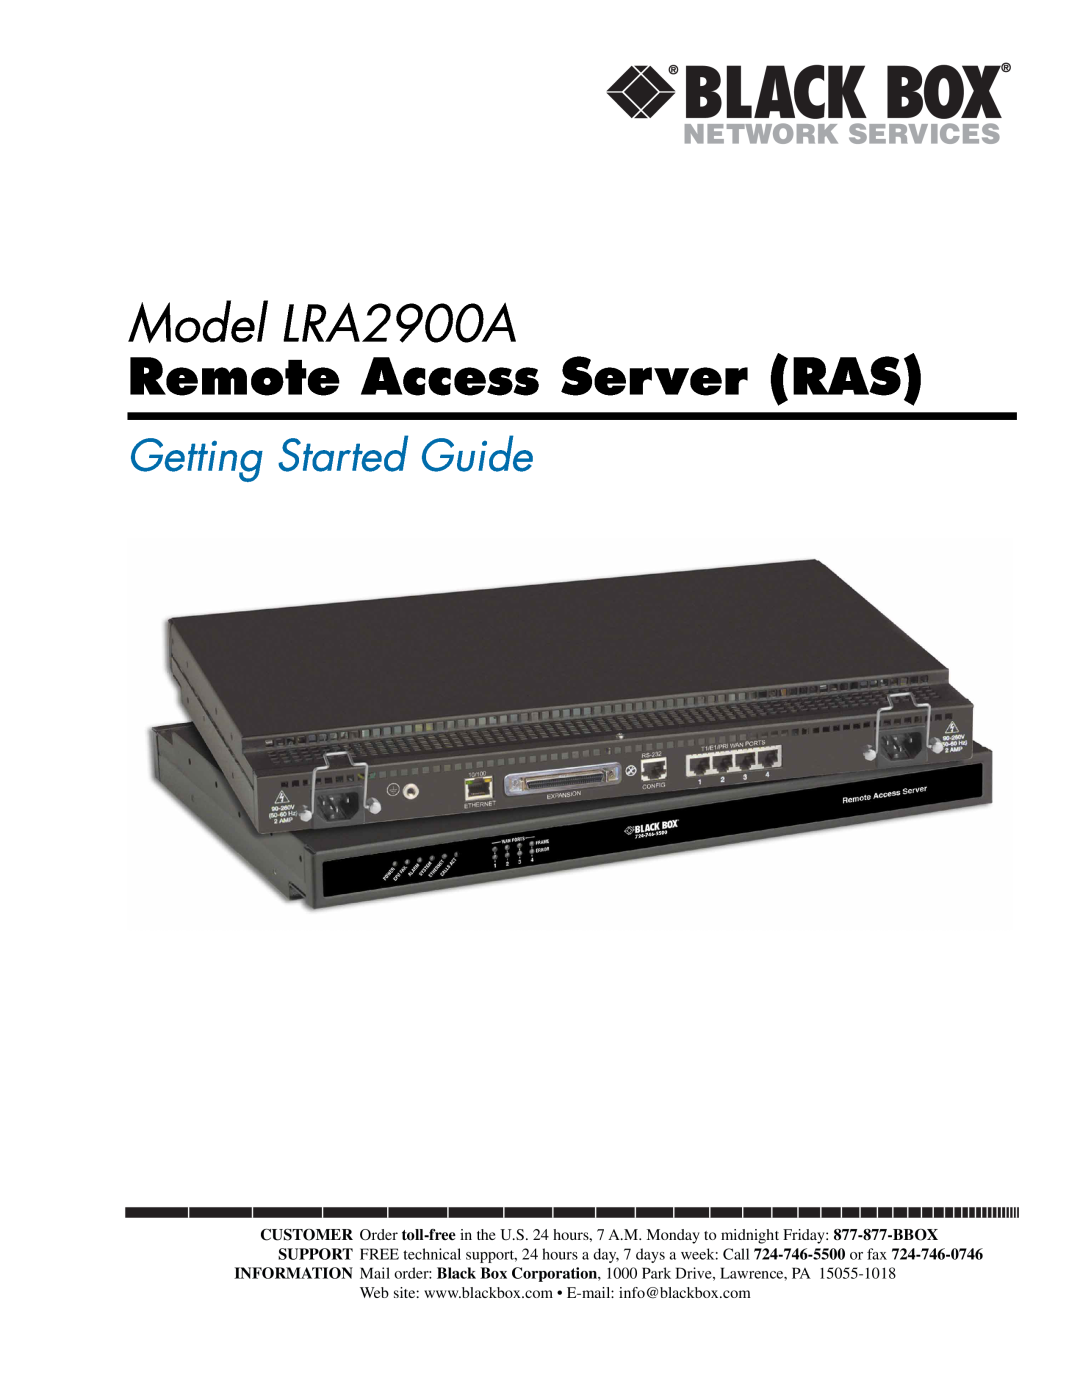 Black Box manual Model LRA2900A, Remote Access Server RAS, Getting Started Guide 